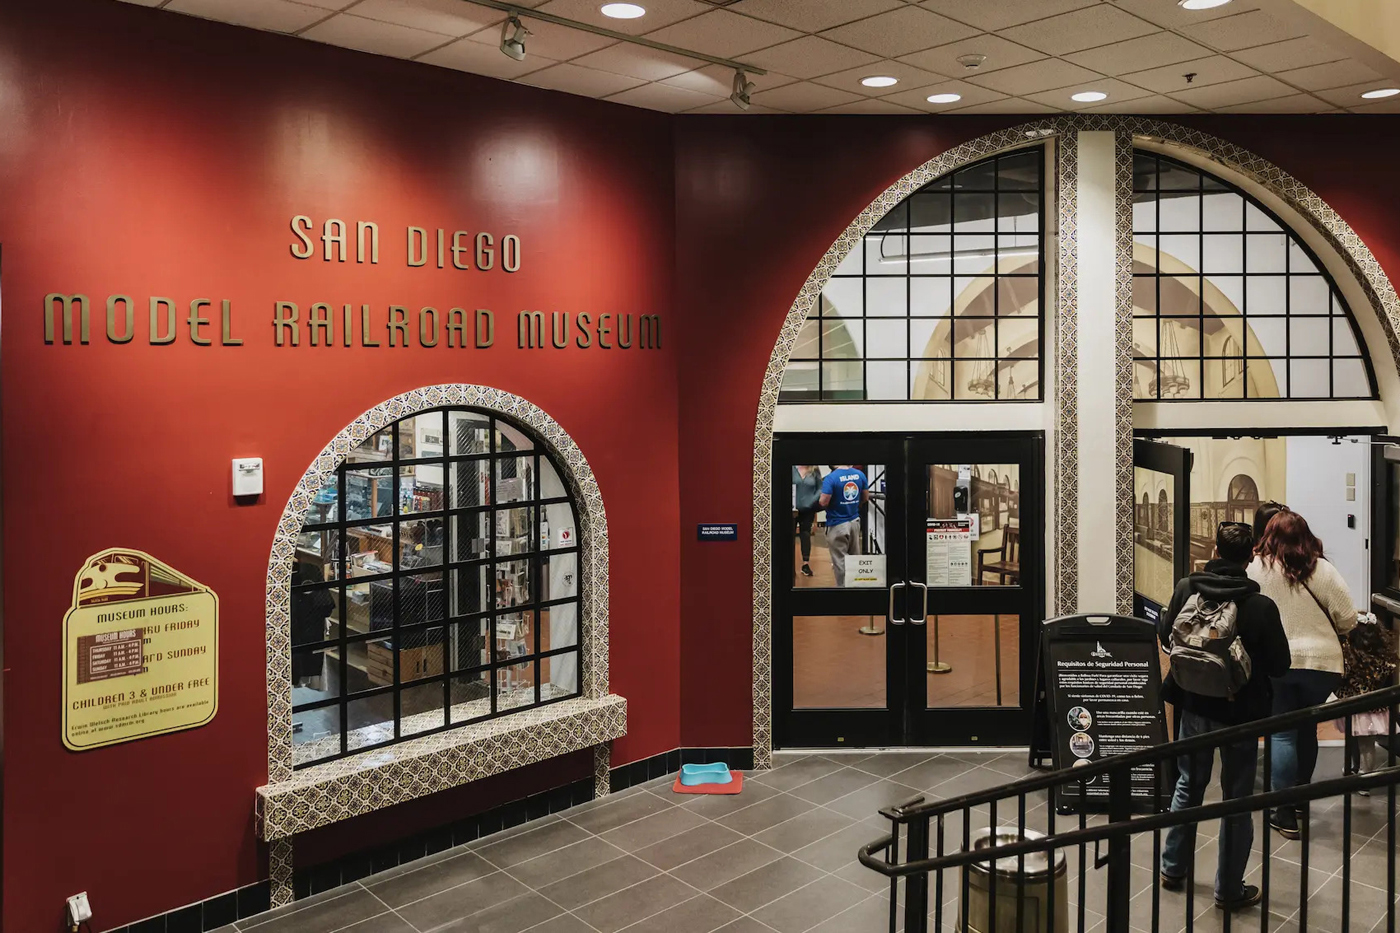 Entrance to the San Diego Model Railroad Museum.